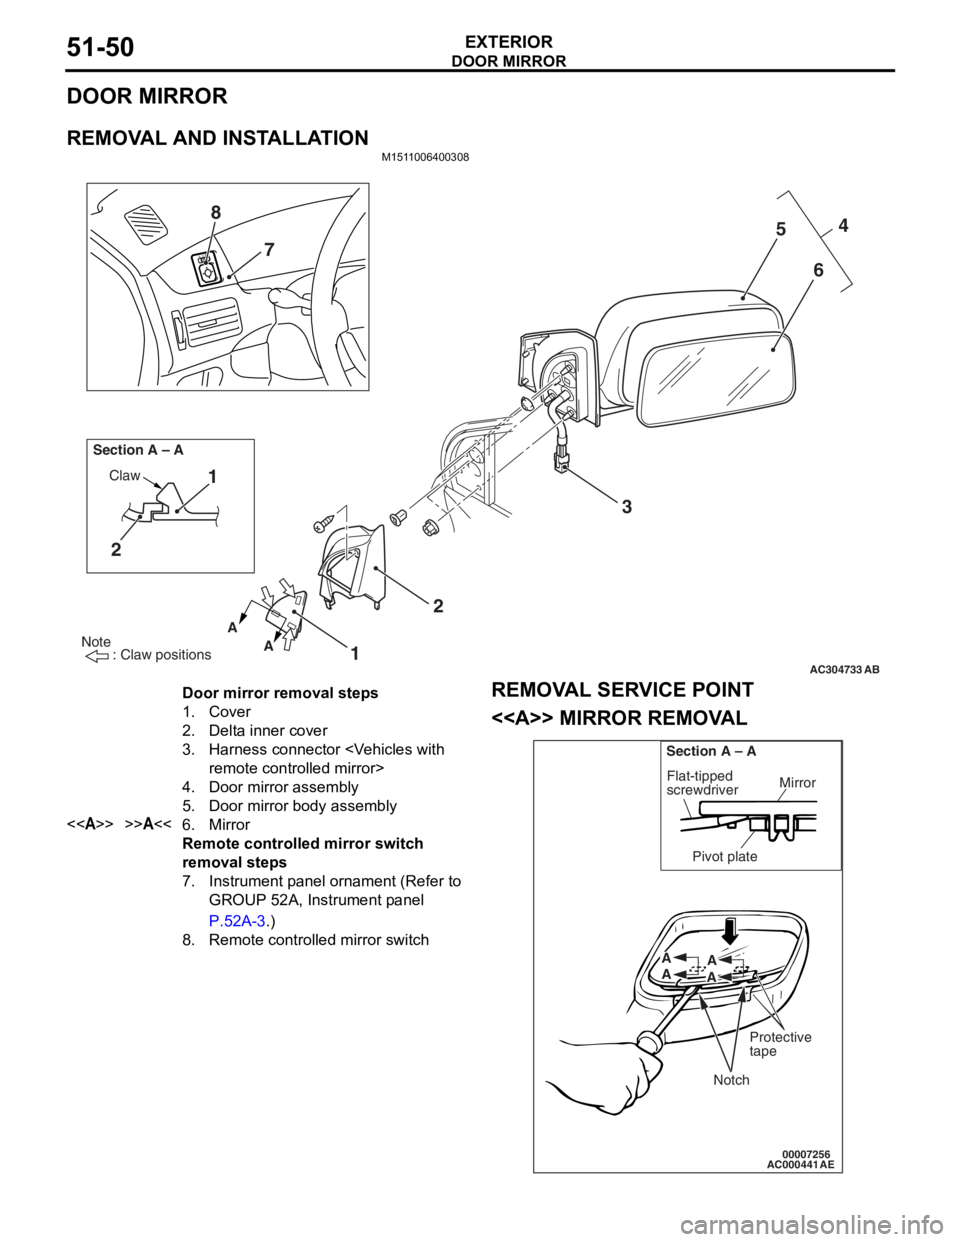 MITSUBISHI LANCER 2006  Workshop Manual 
DOOR MIRROR
EXTERIOR51-50
DOOR MIRROR
REMOVAL AND INSTALLATION
M1511006400308
AC304733
Note
        : Claw positions
AB
AA
Section A – A
Claw1
2
12 3 4
5
6
7
8
Door mirror removal steps 
1.Cover
2.